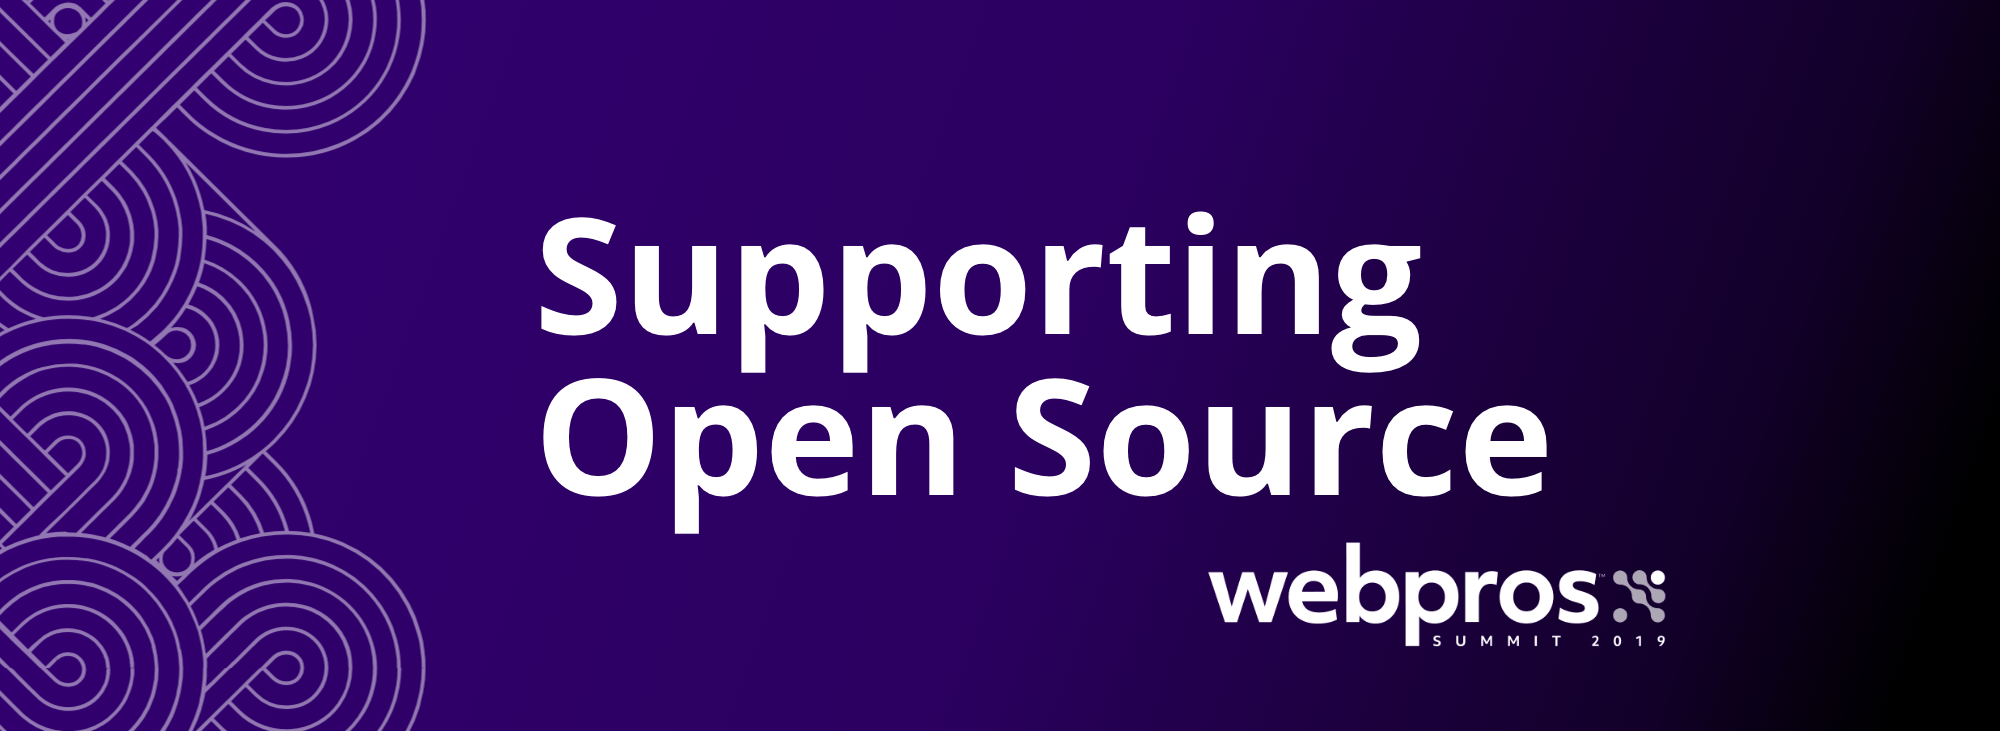 Supporting Open Source | cPanel Blog